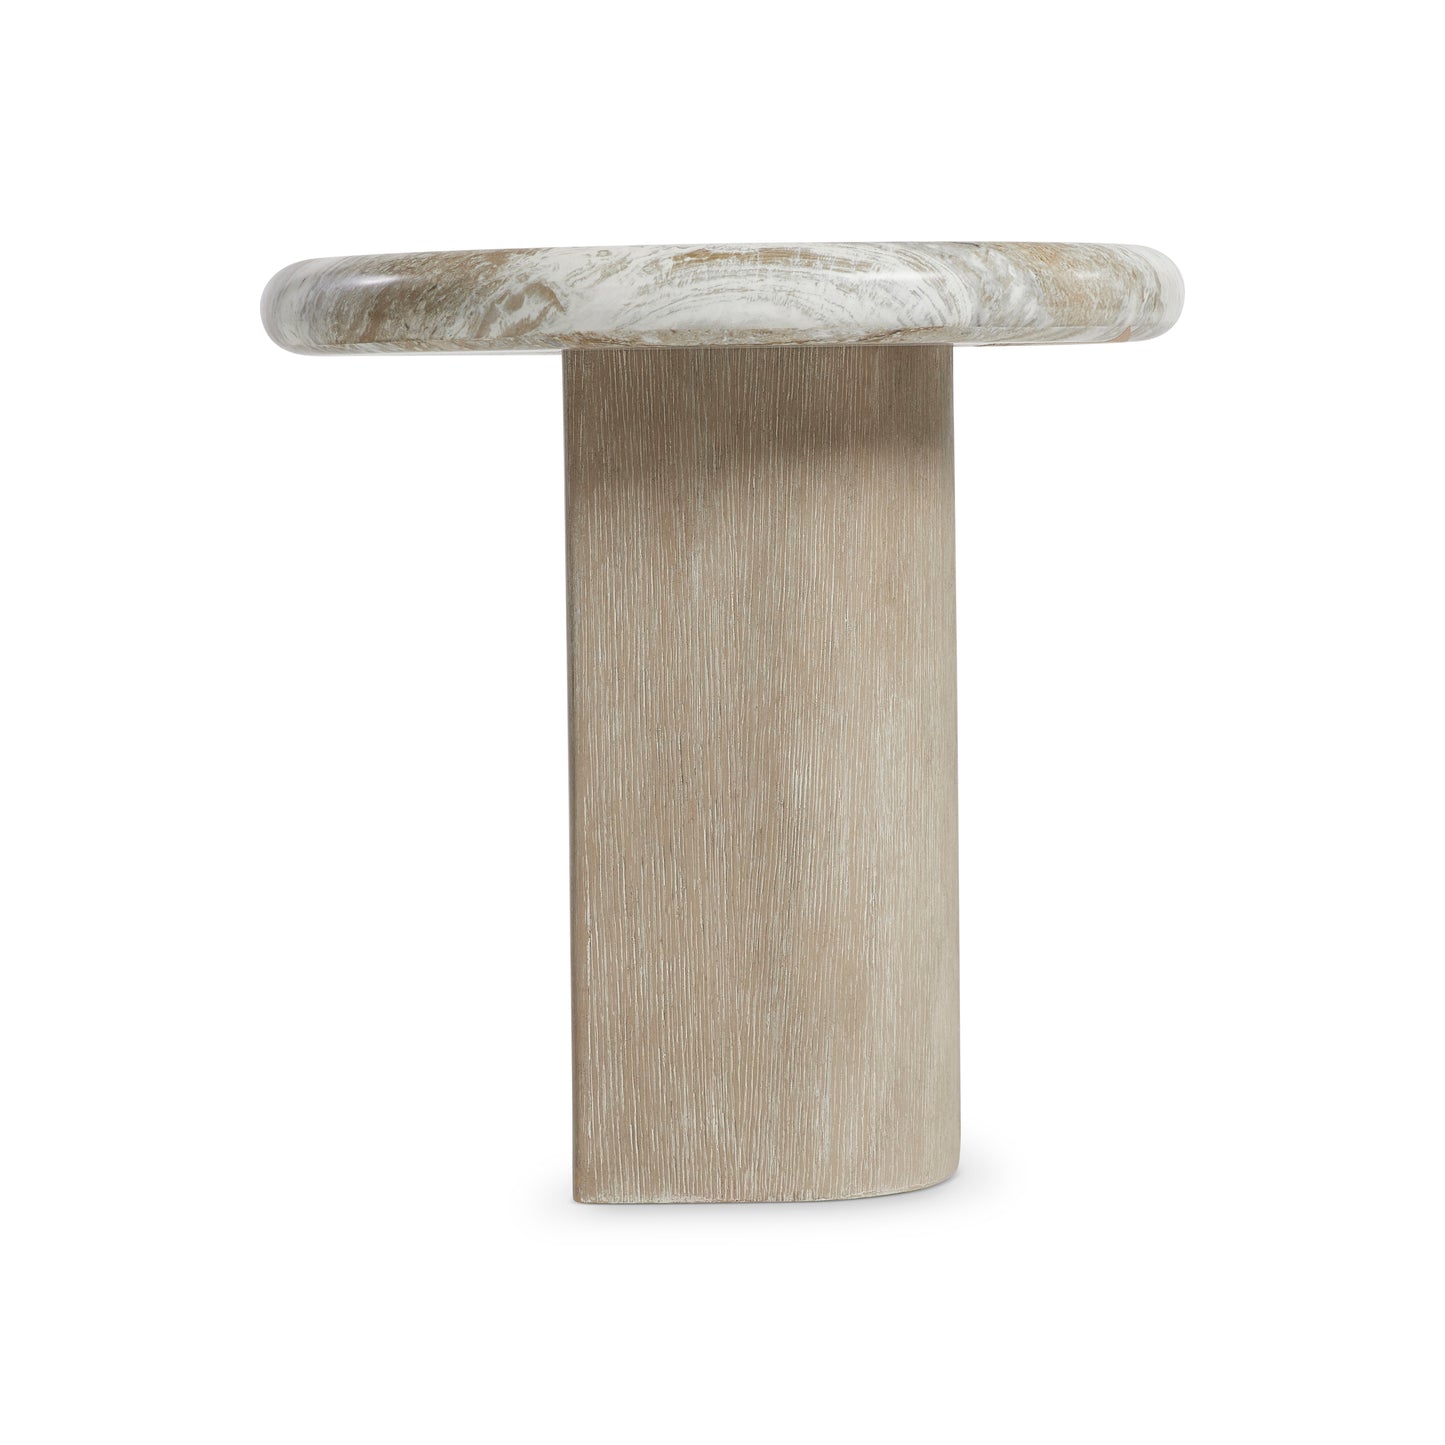 Arcadia Accent Table